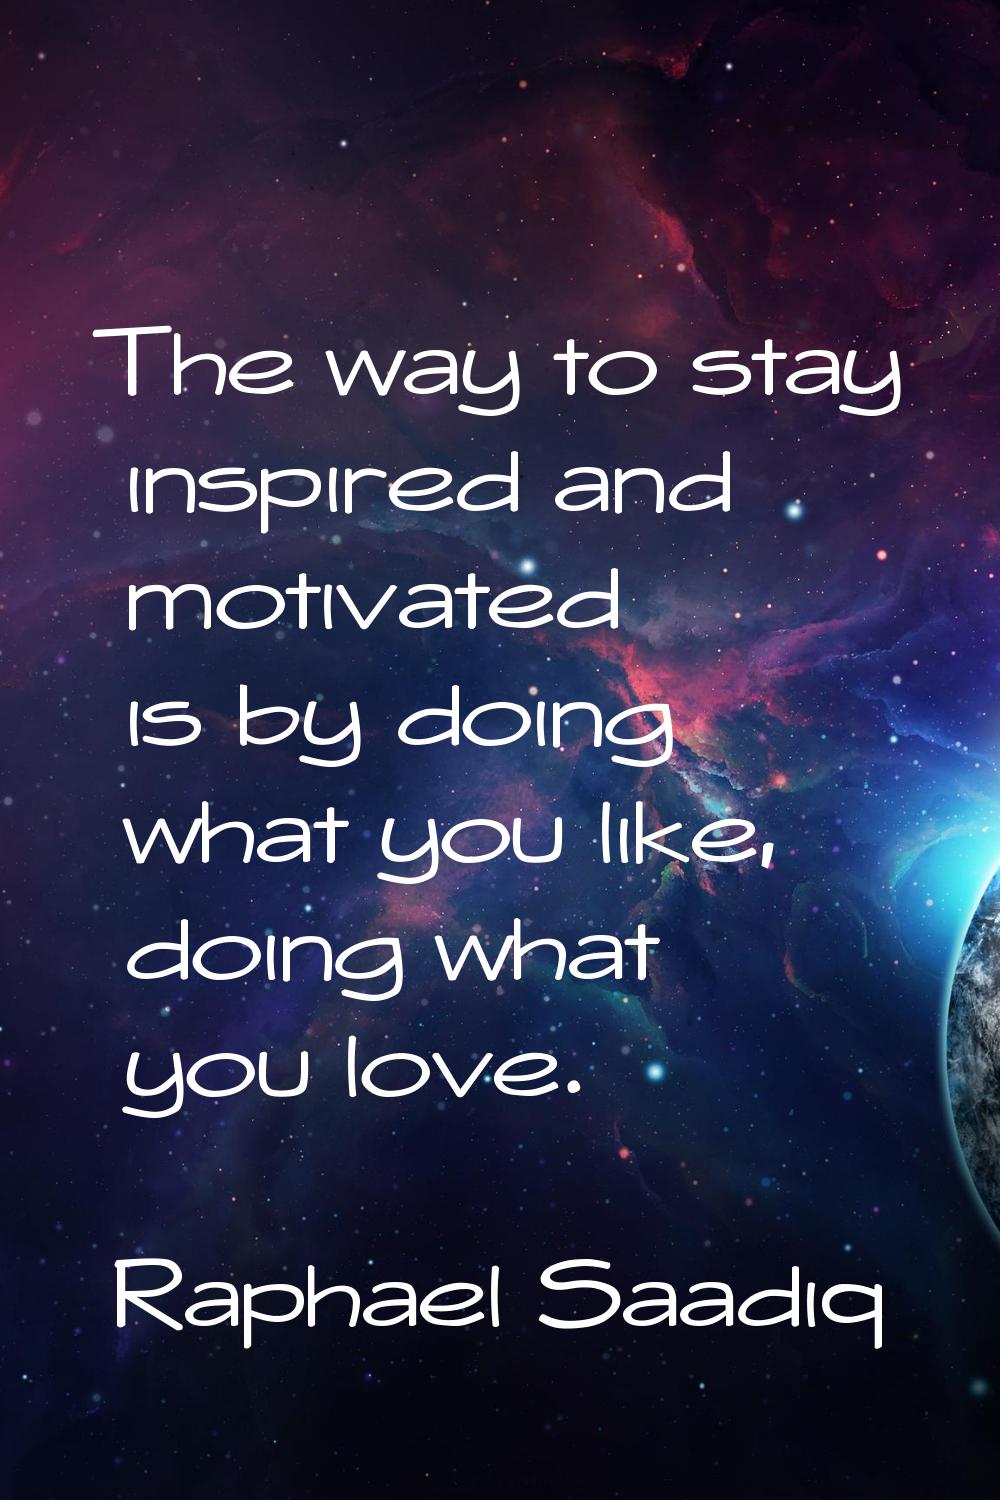 The way to stay inspired and motivated is by doing what you like, doing what you love.